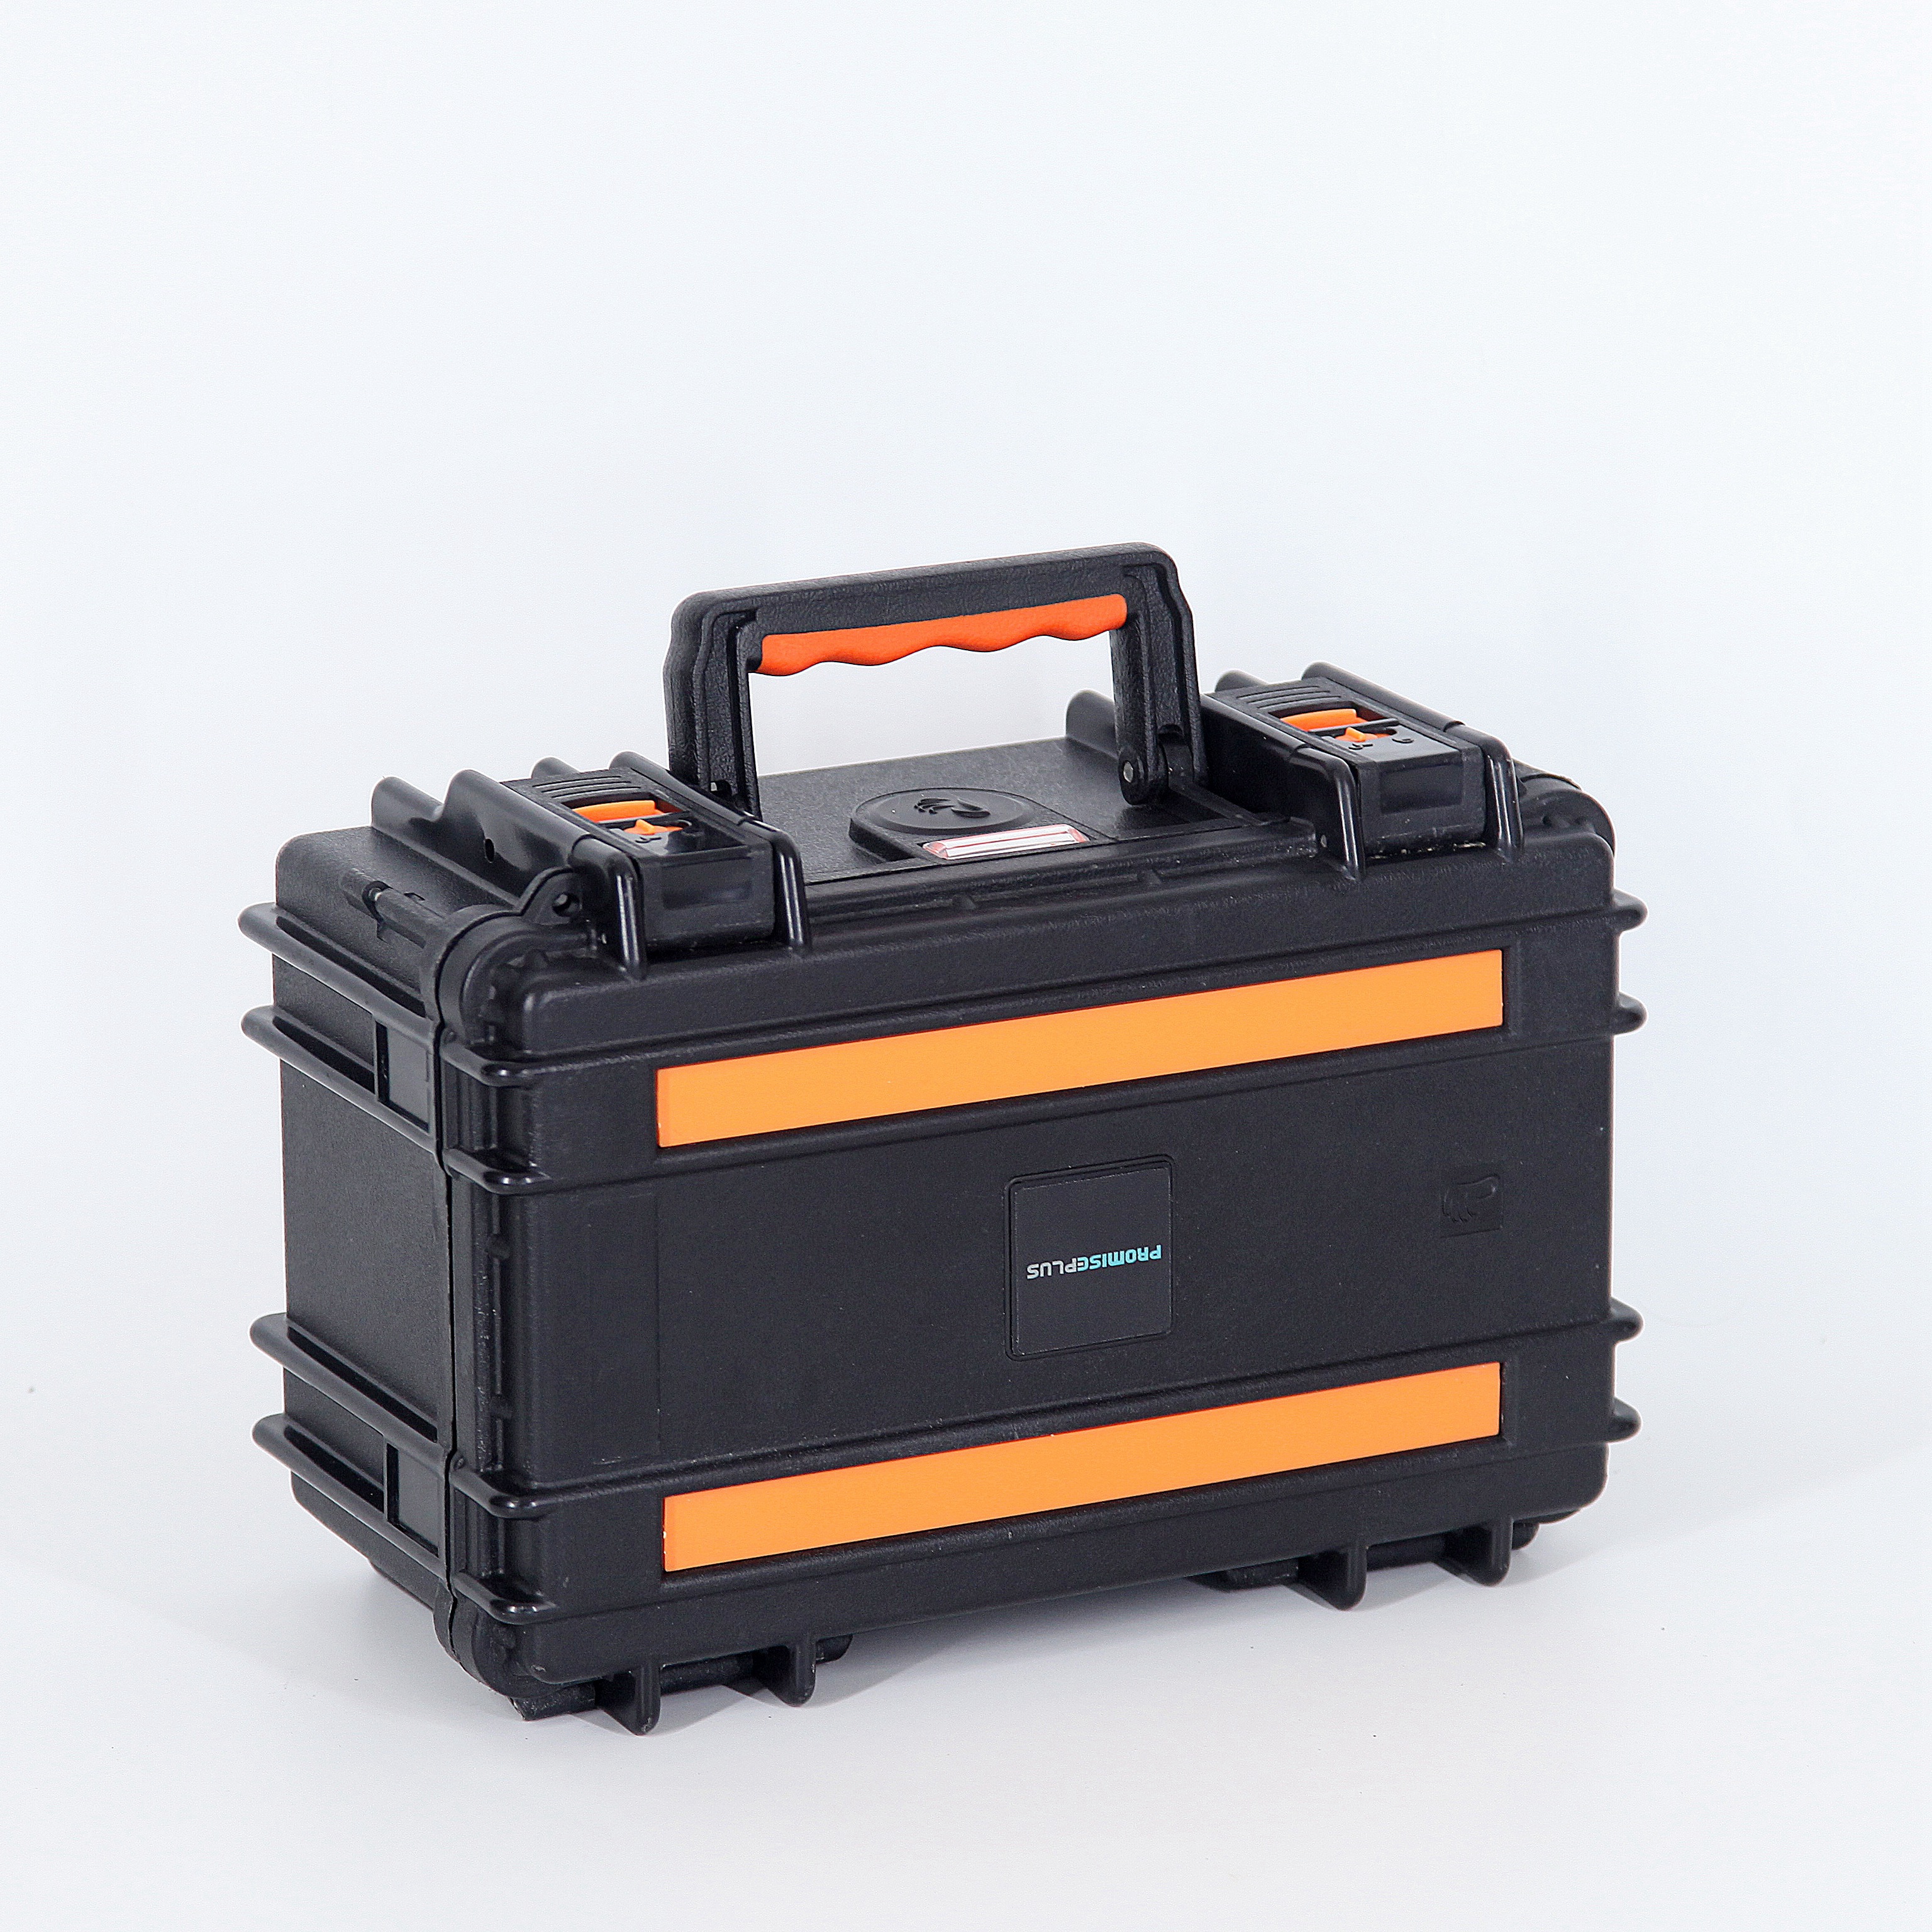 [X-A2602][260*150*133mm]High Quality Hard Plastic Waterproof Protection Travel Case Drone Case Camera Storage Box with Foam